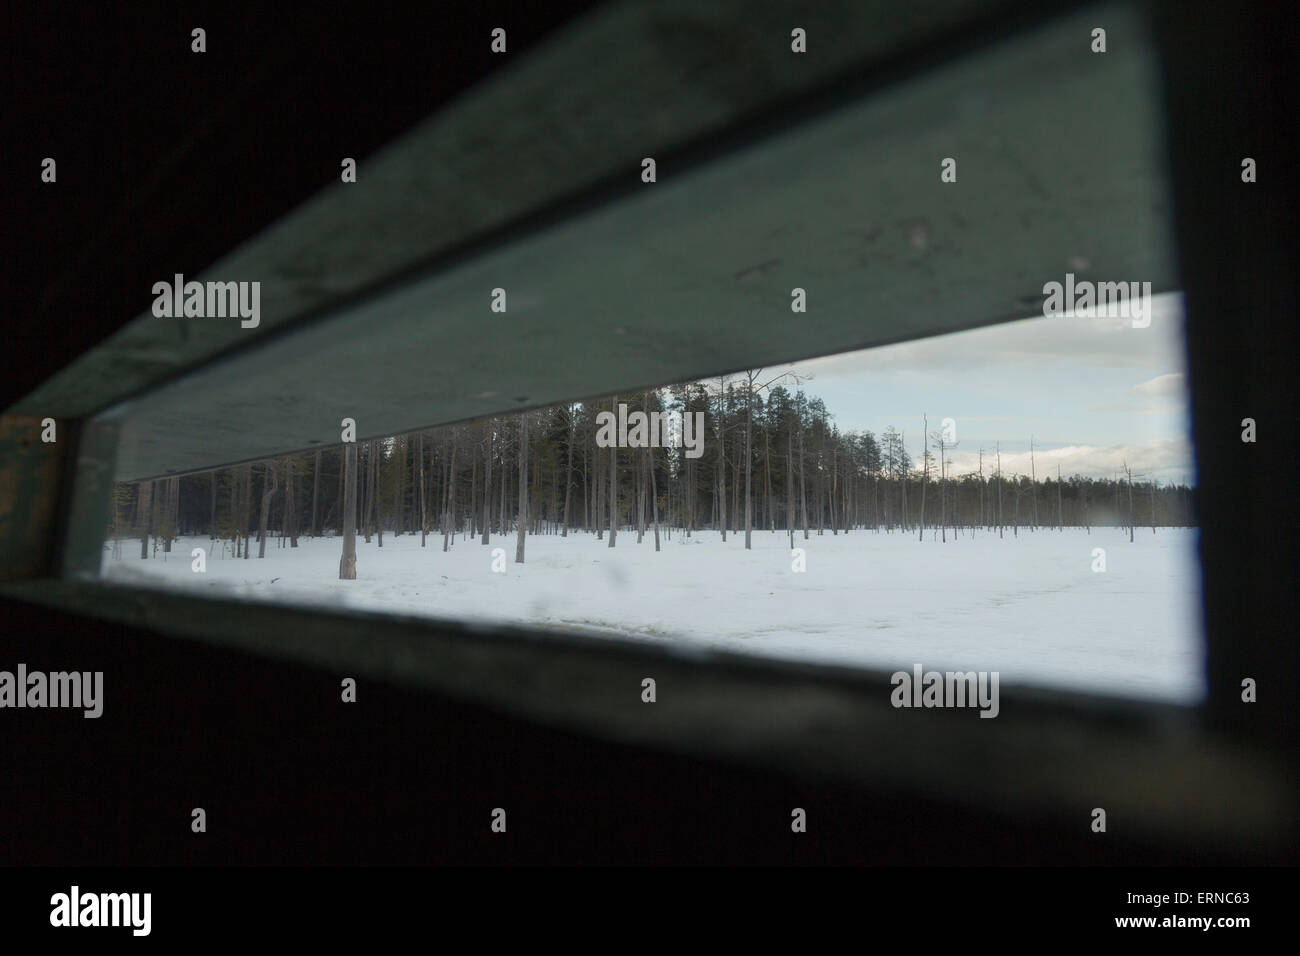 View from inside a Brown Bear rental photography hide, Finland. Stock Photo